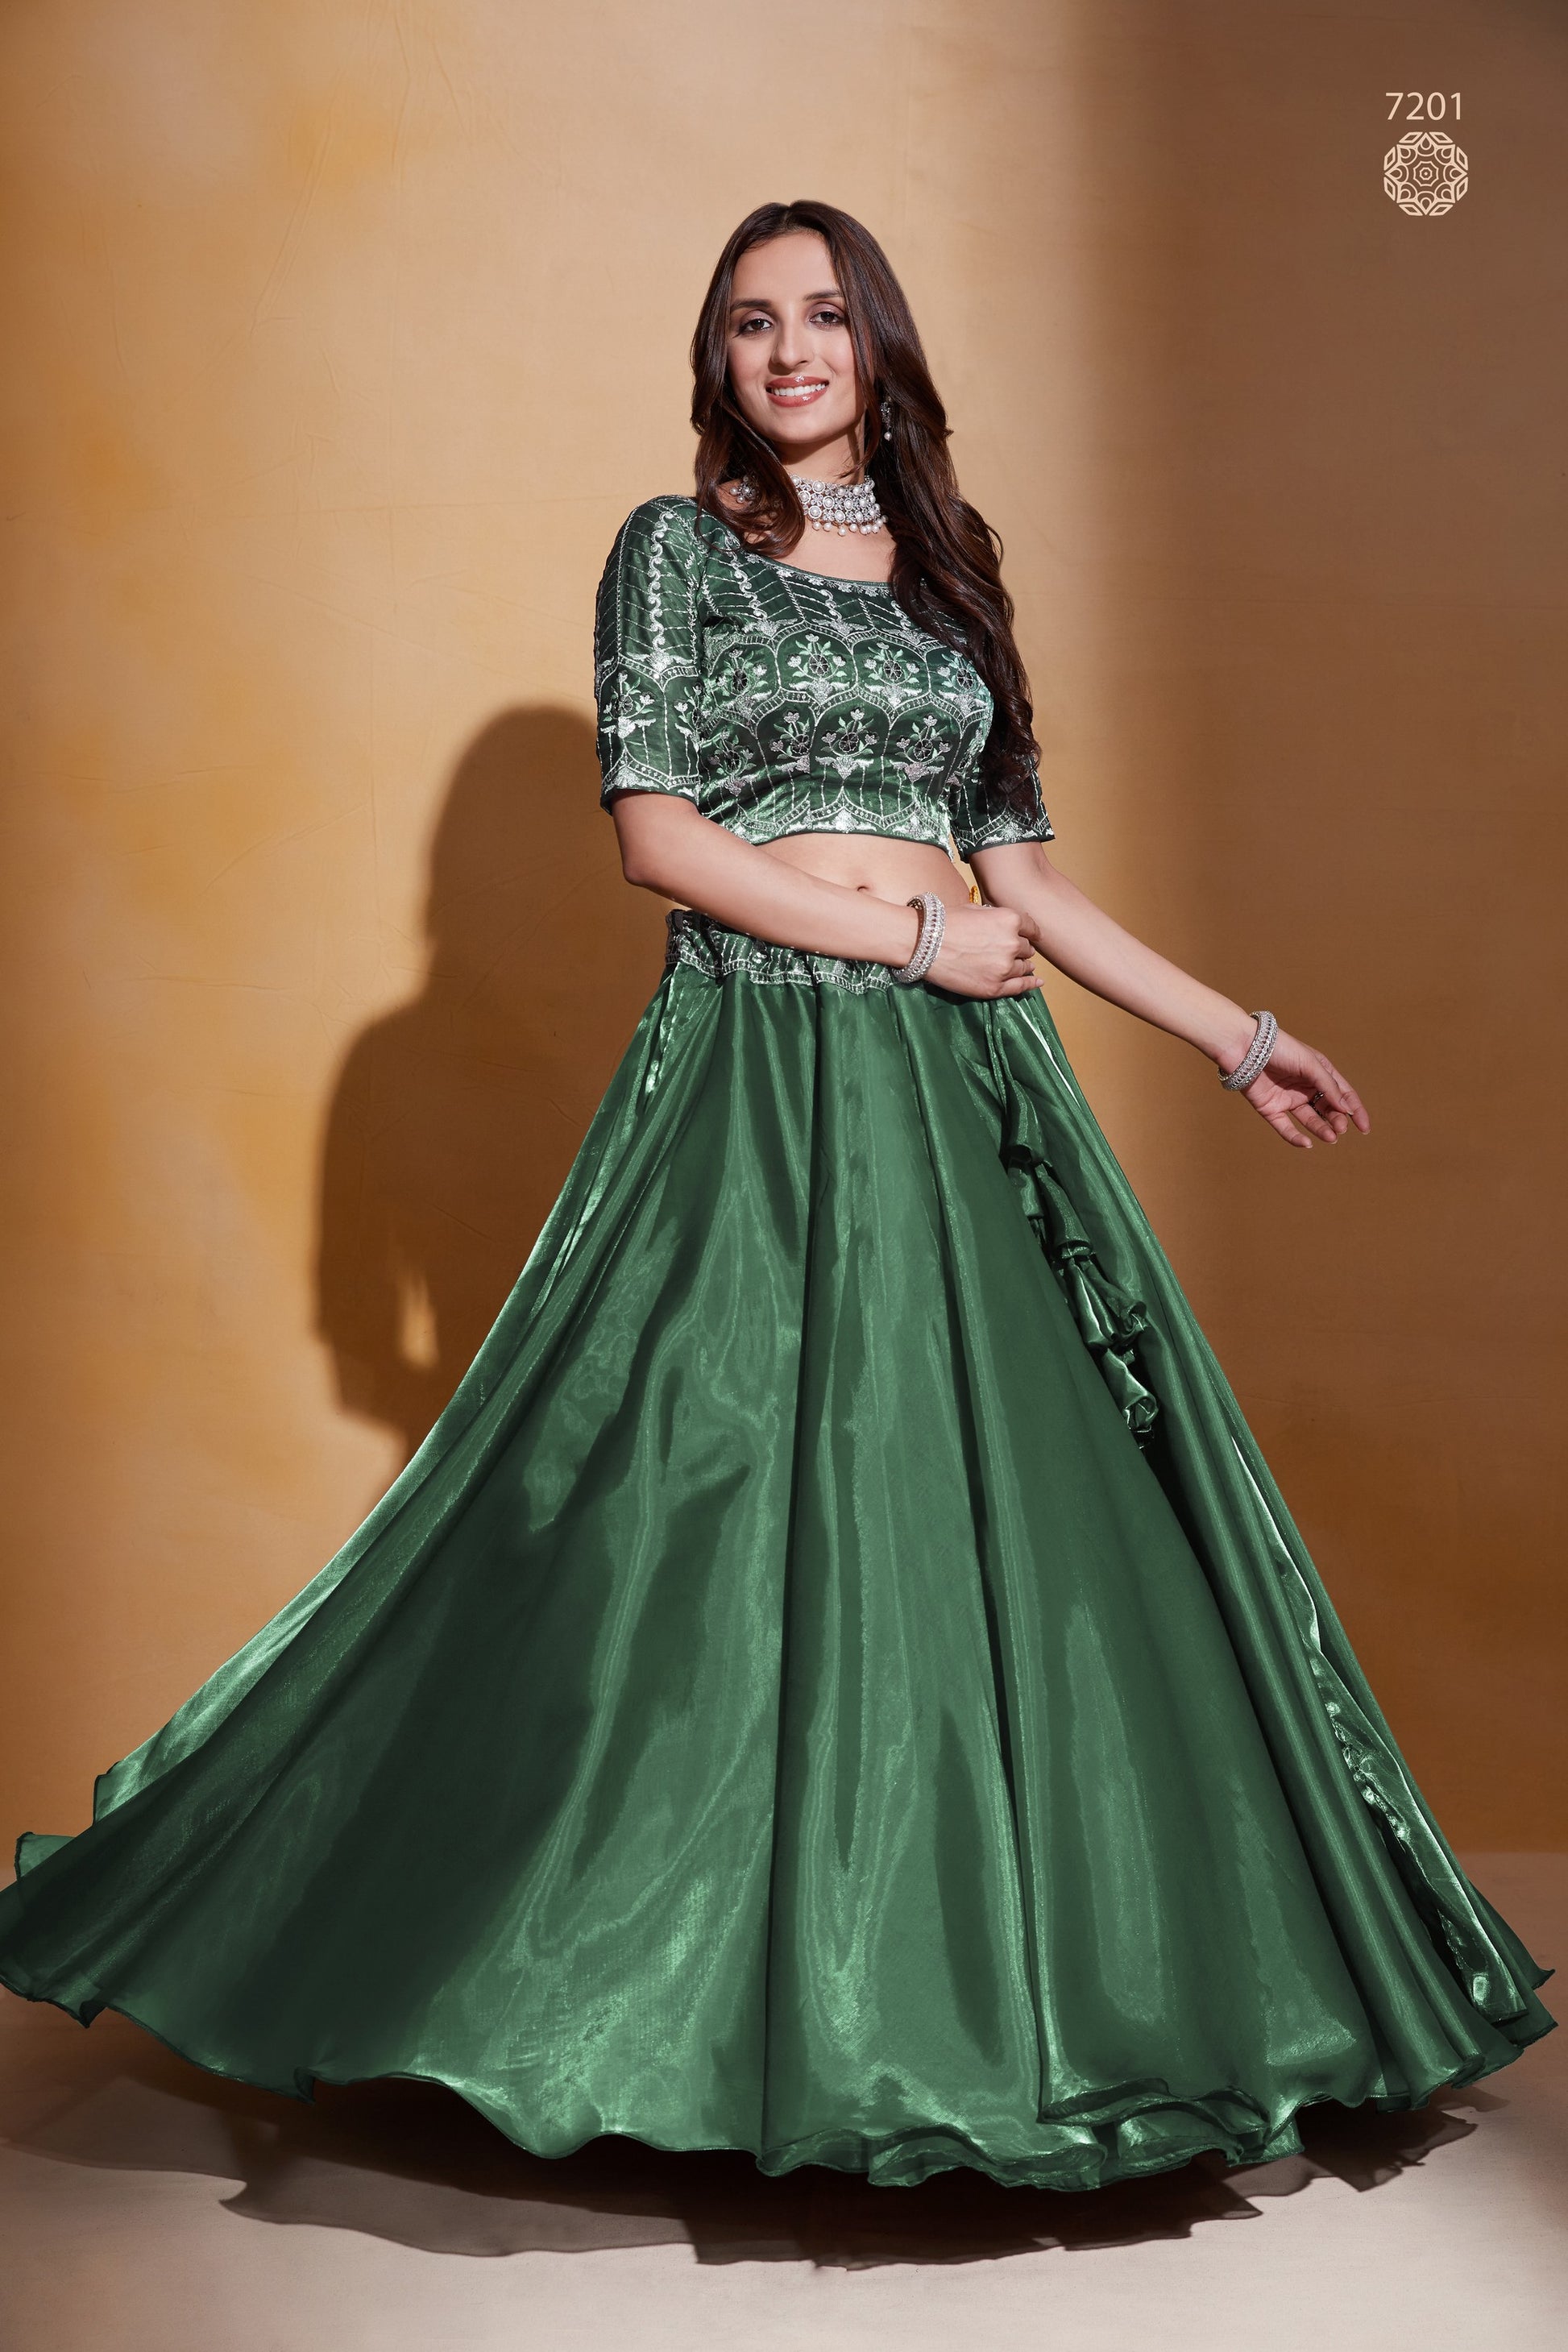 Green Organza Silk Lehenga Choli 18 Meter Flair For Indian Festivals & Weddings - Sequence Embroidery Work, Thread Embroidery Work